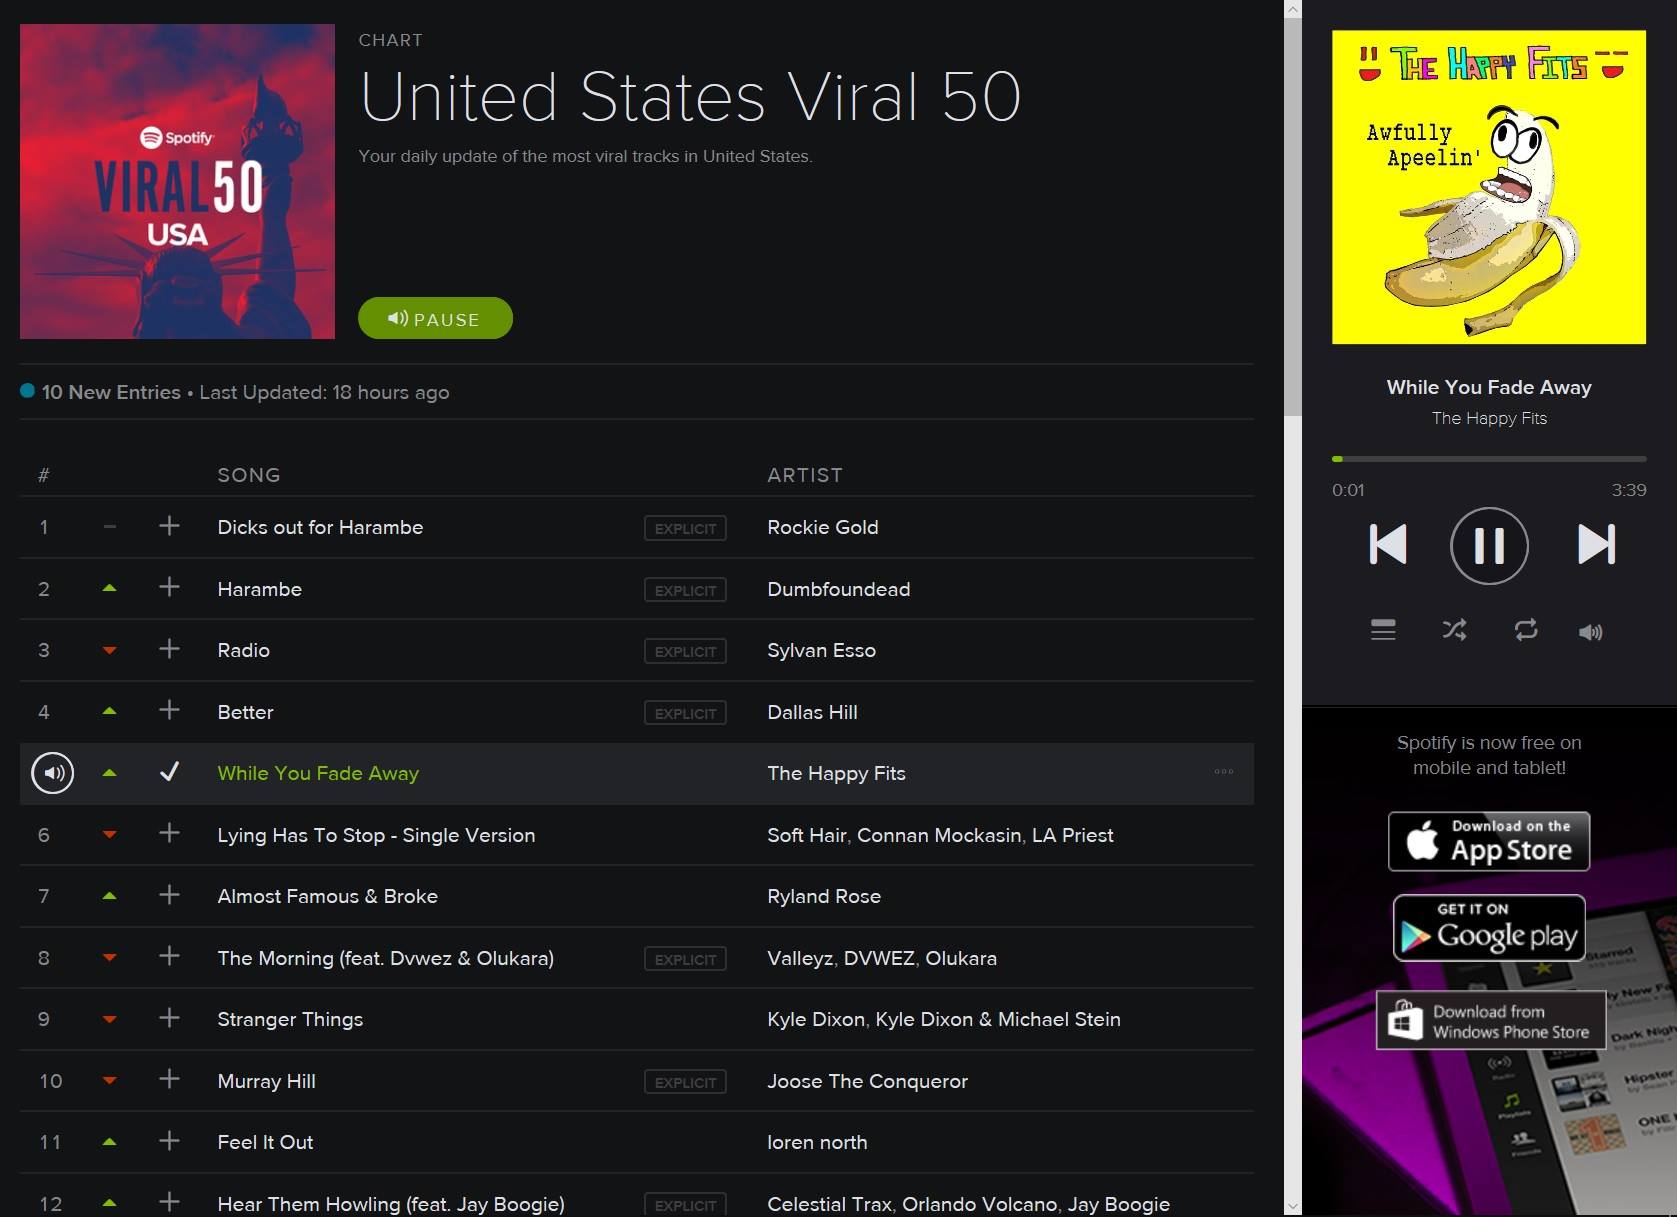 The Happy Fits' "While You Fade Away" was featured on Spotify's United States Viral 50 playlist